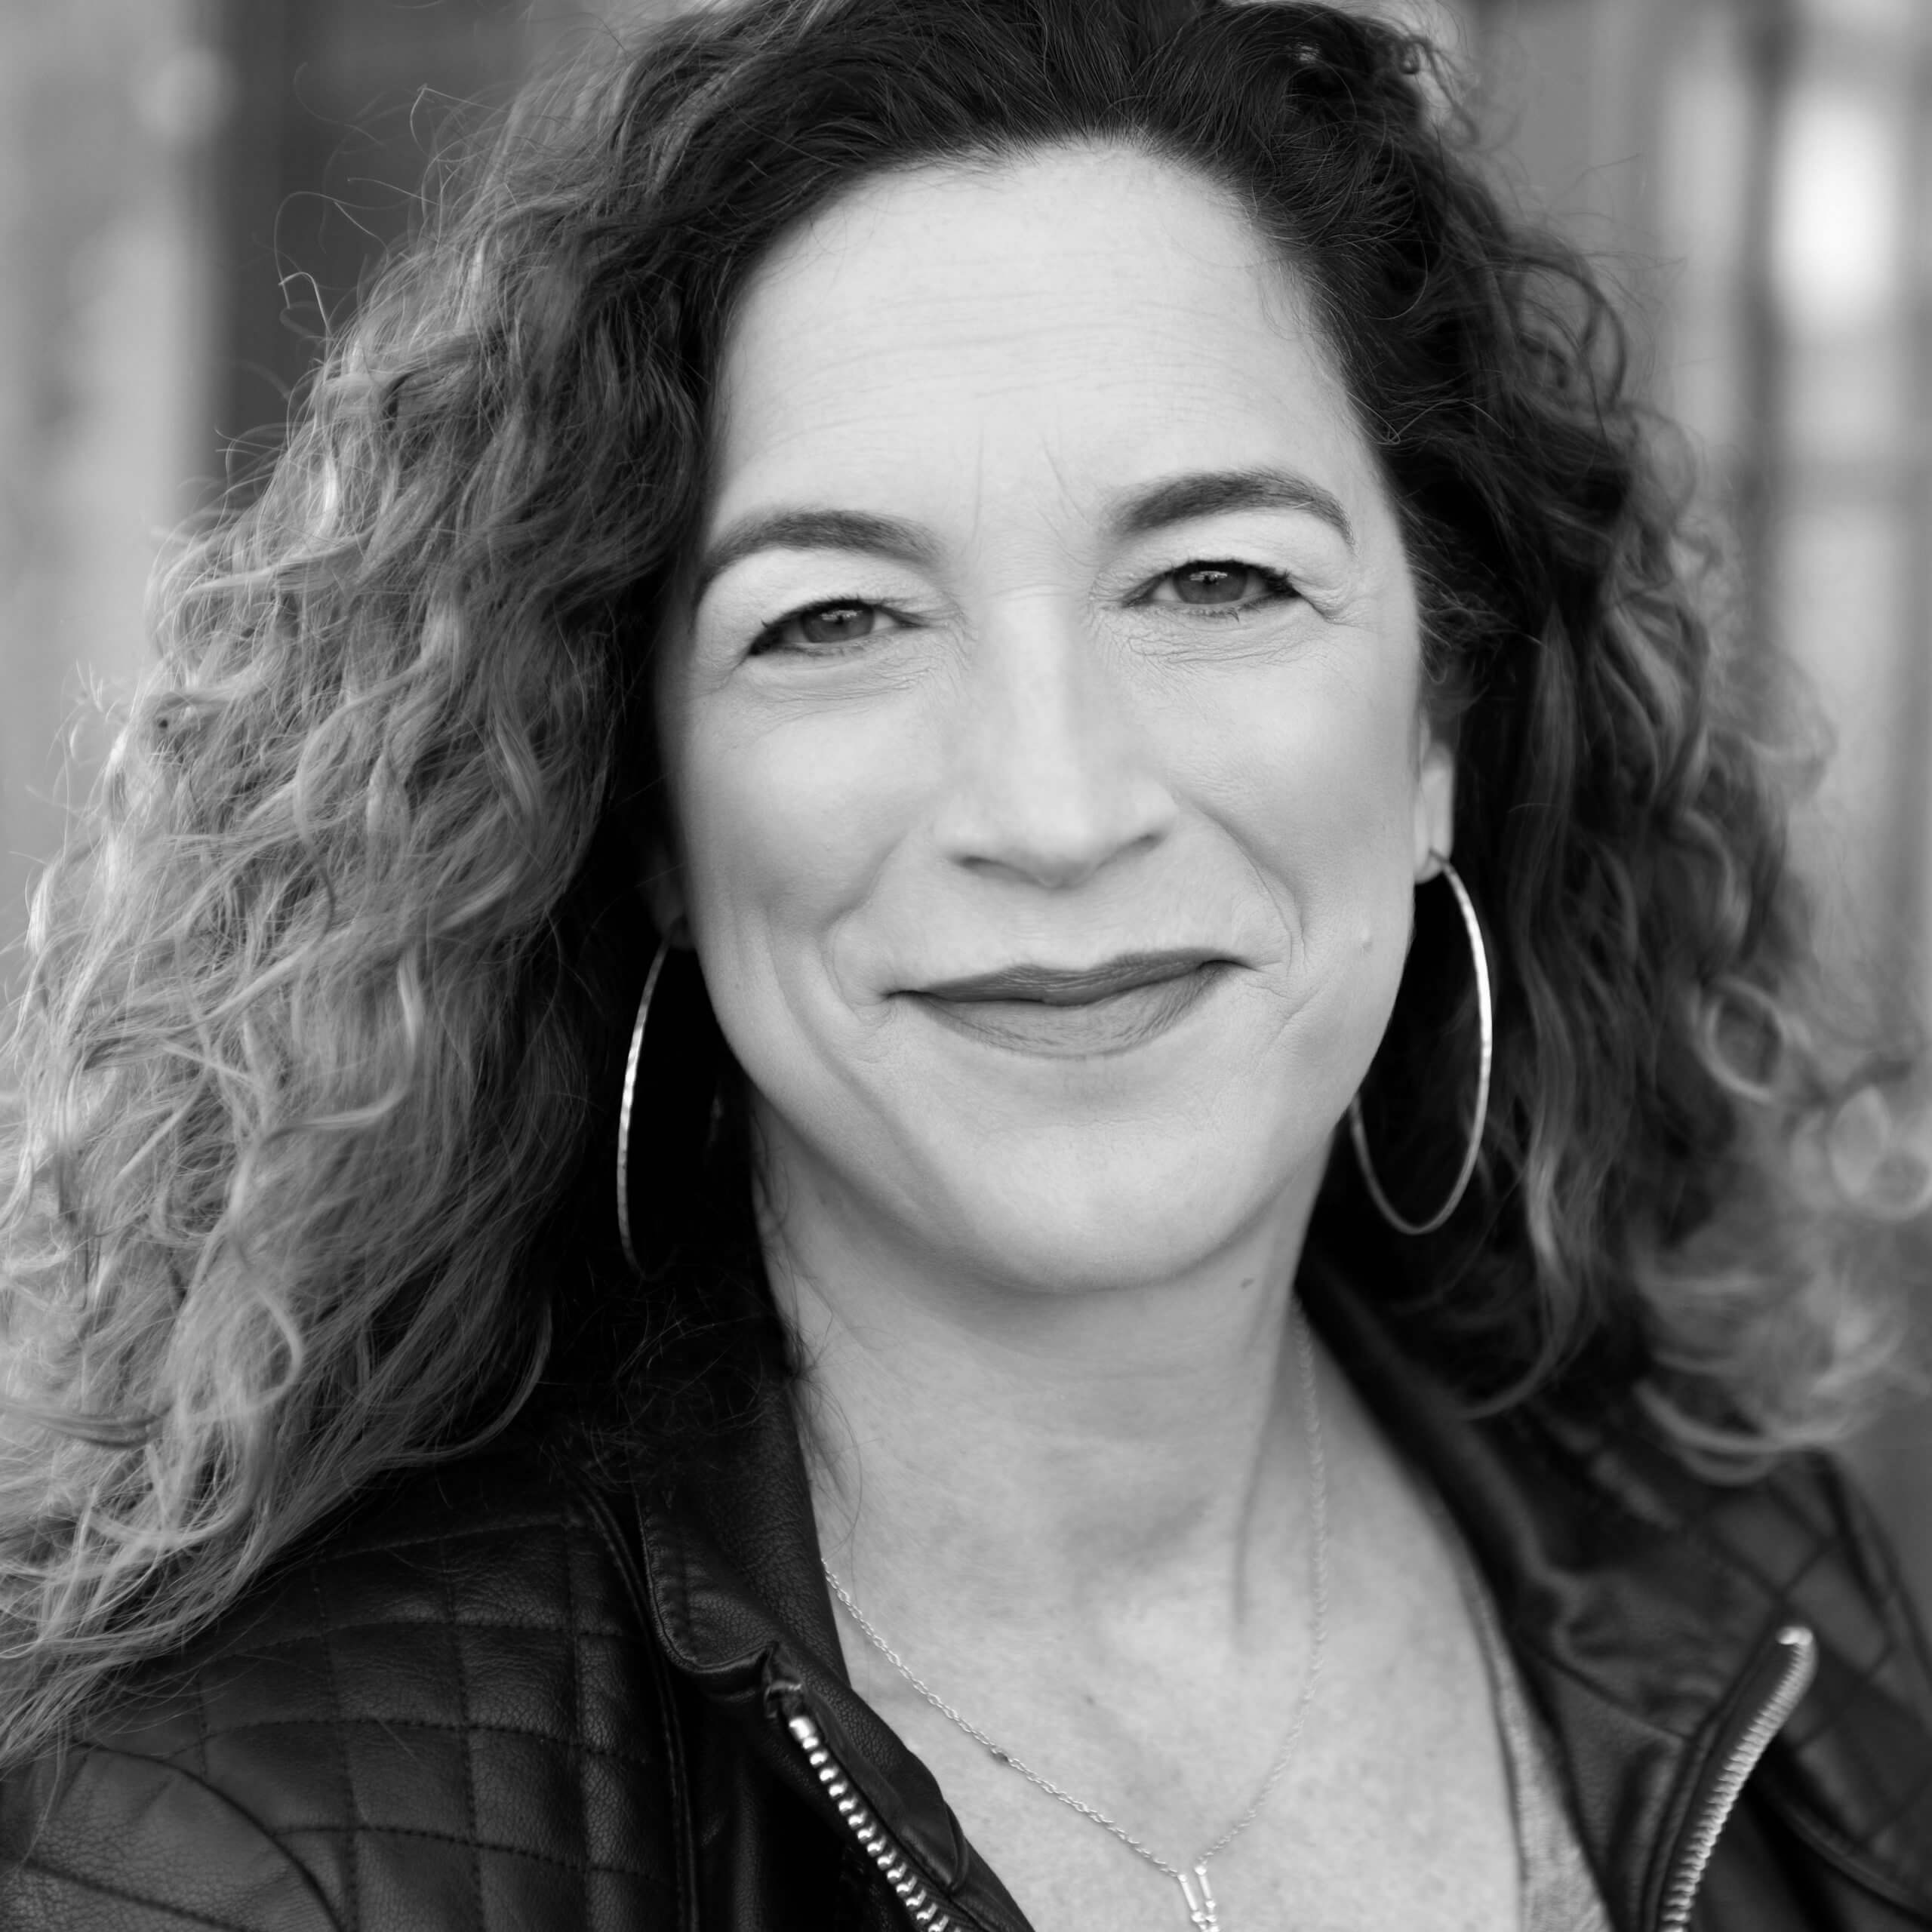 Kristi Jacobson slightly smiling and looking directly at the camera. She has medium curly hair and wears a jacket, thin hoop earrings, and a necklace. Portrait in black and white.